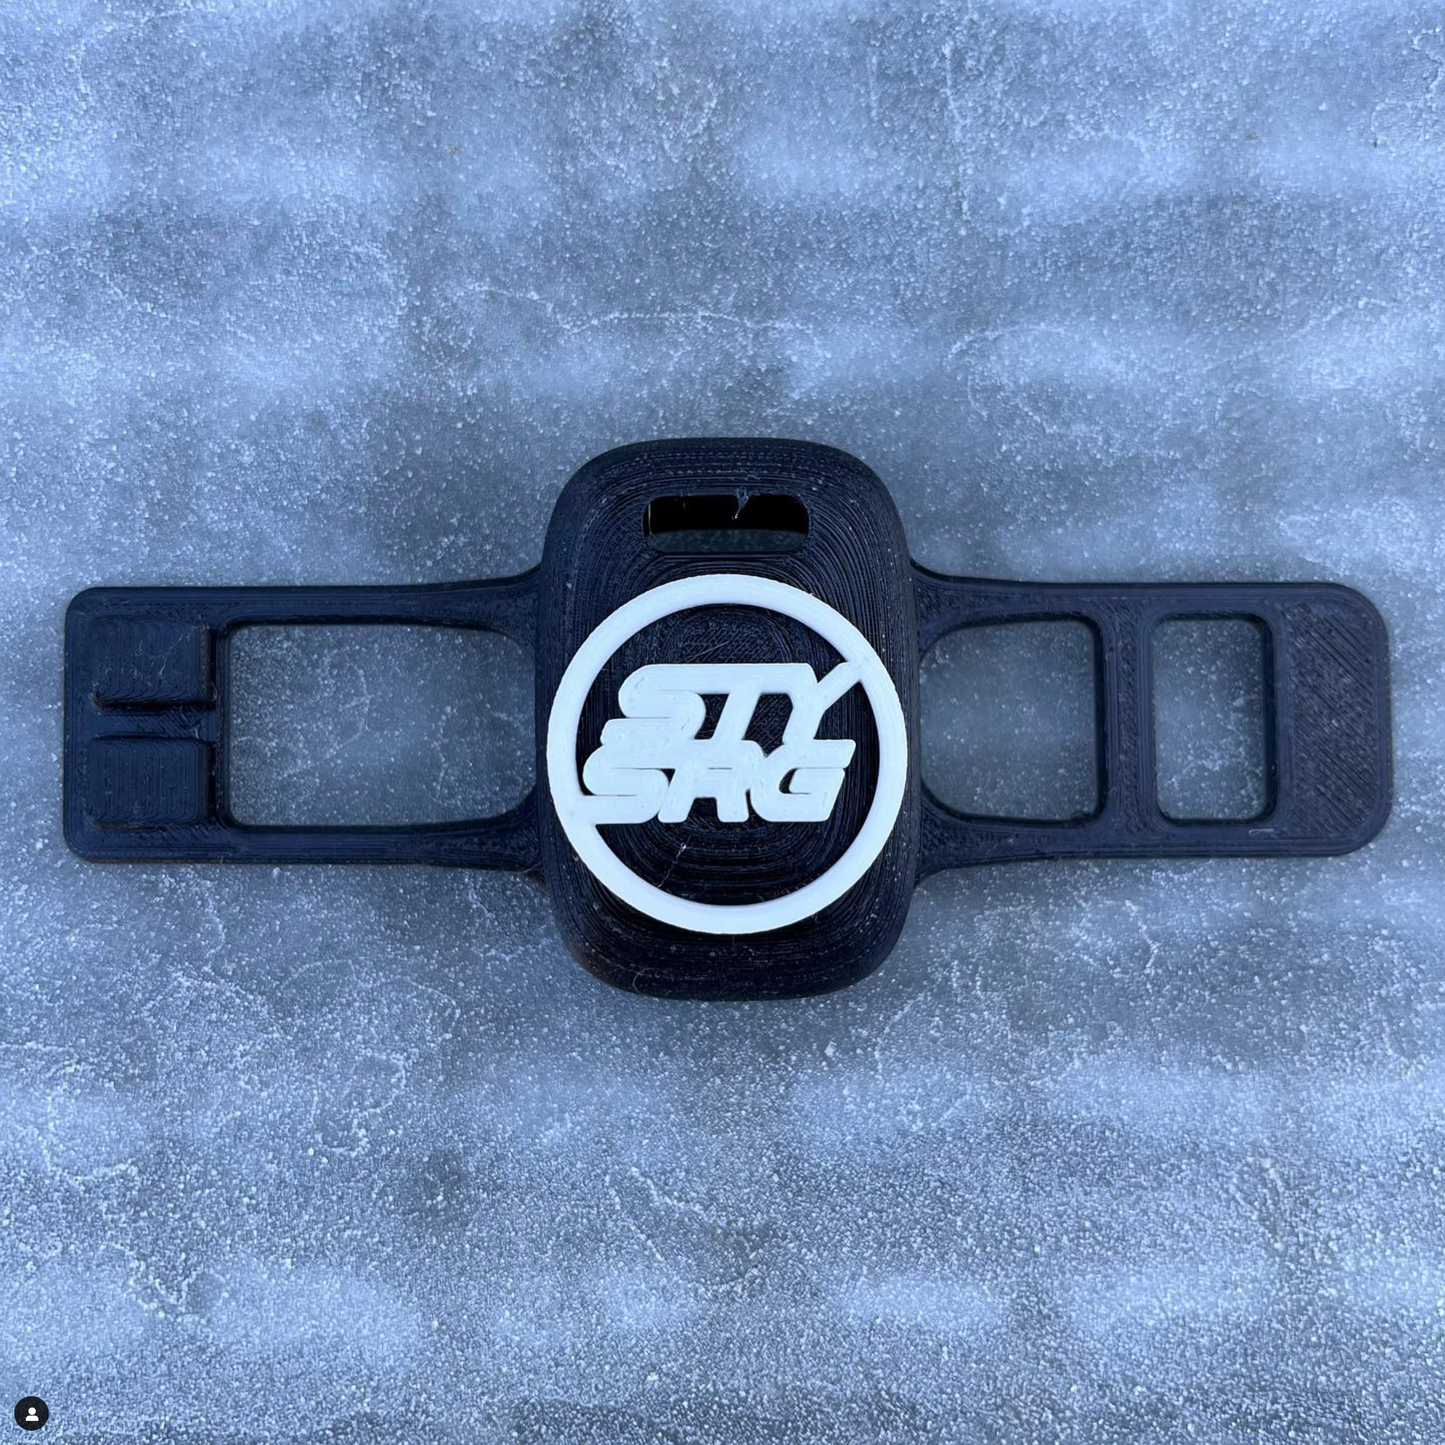 Personalised 3d Printed Rubber Transponder Mount and Strap – Fits Mylaps ProChip FLEX